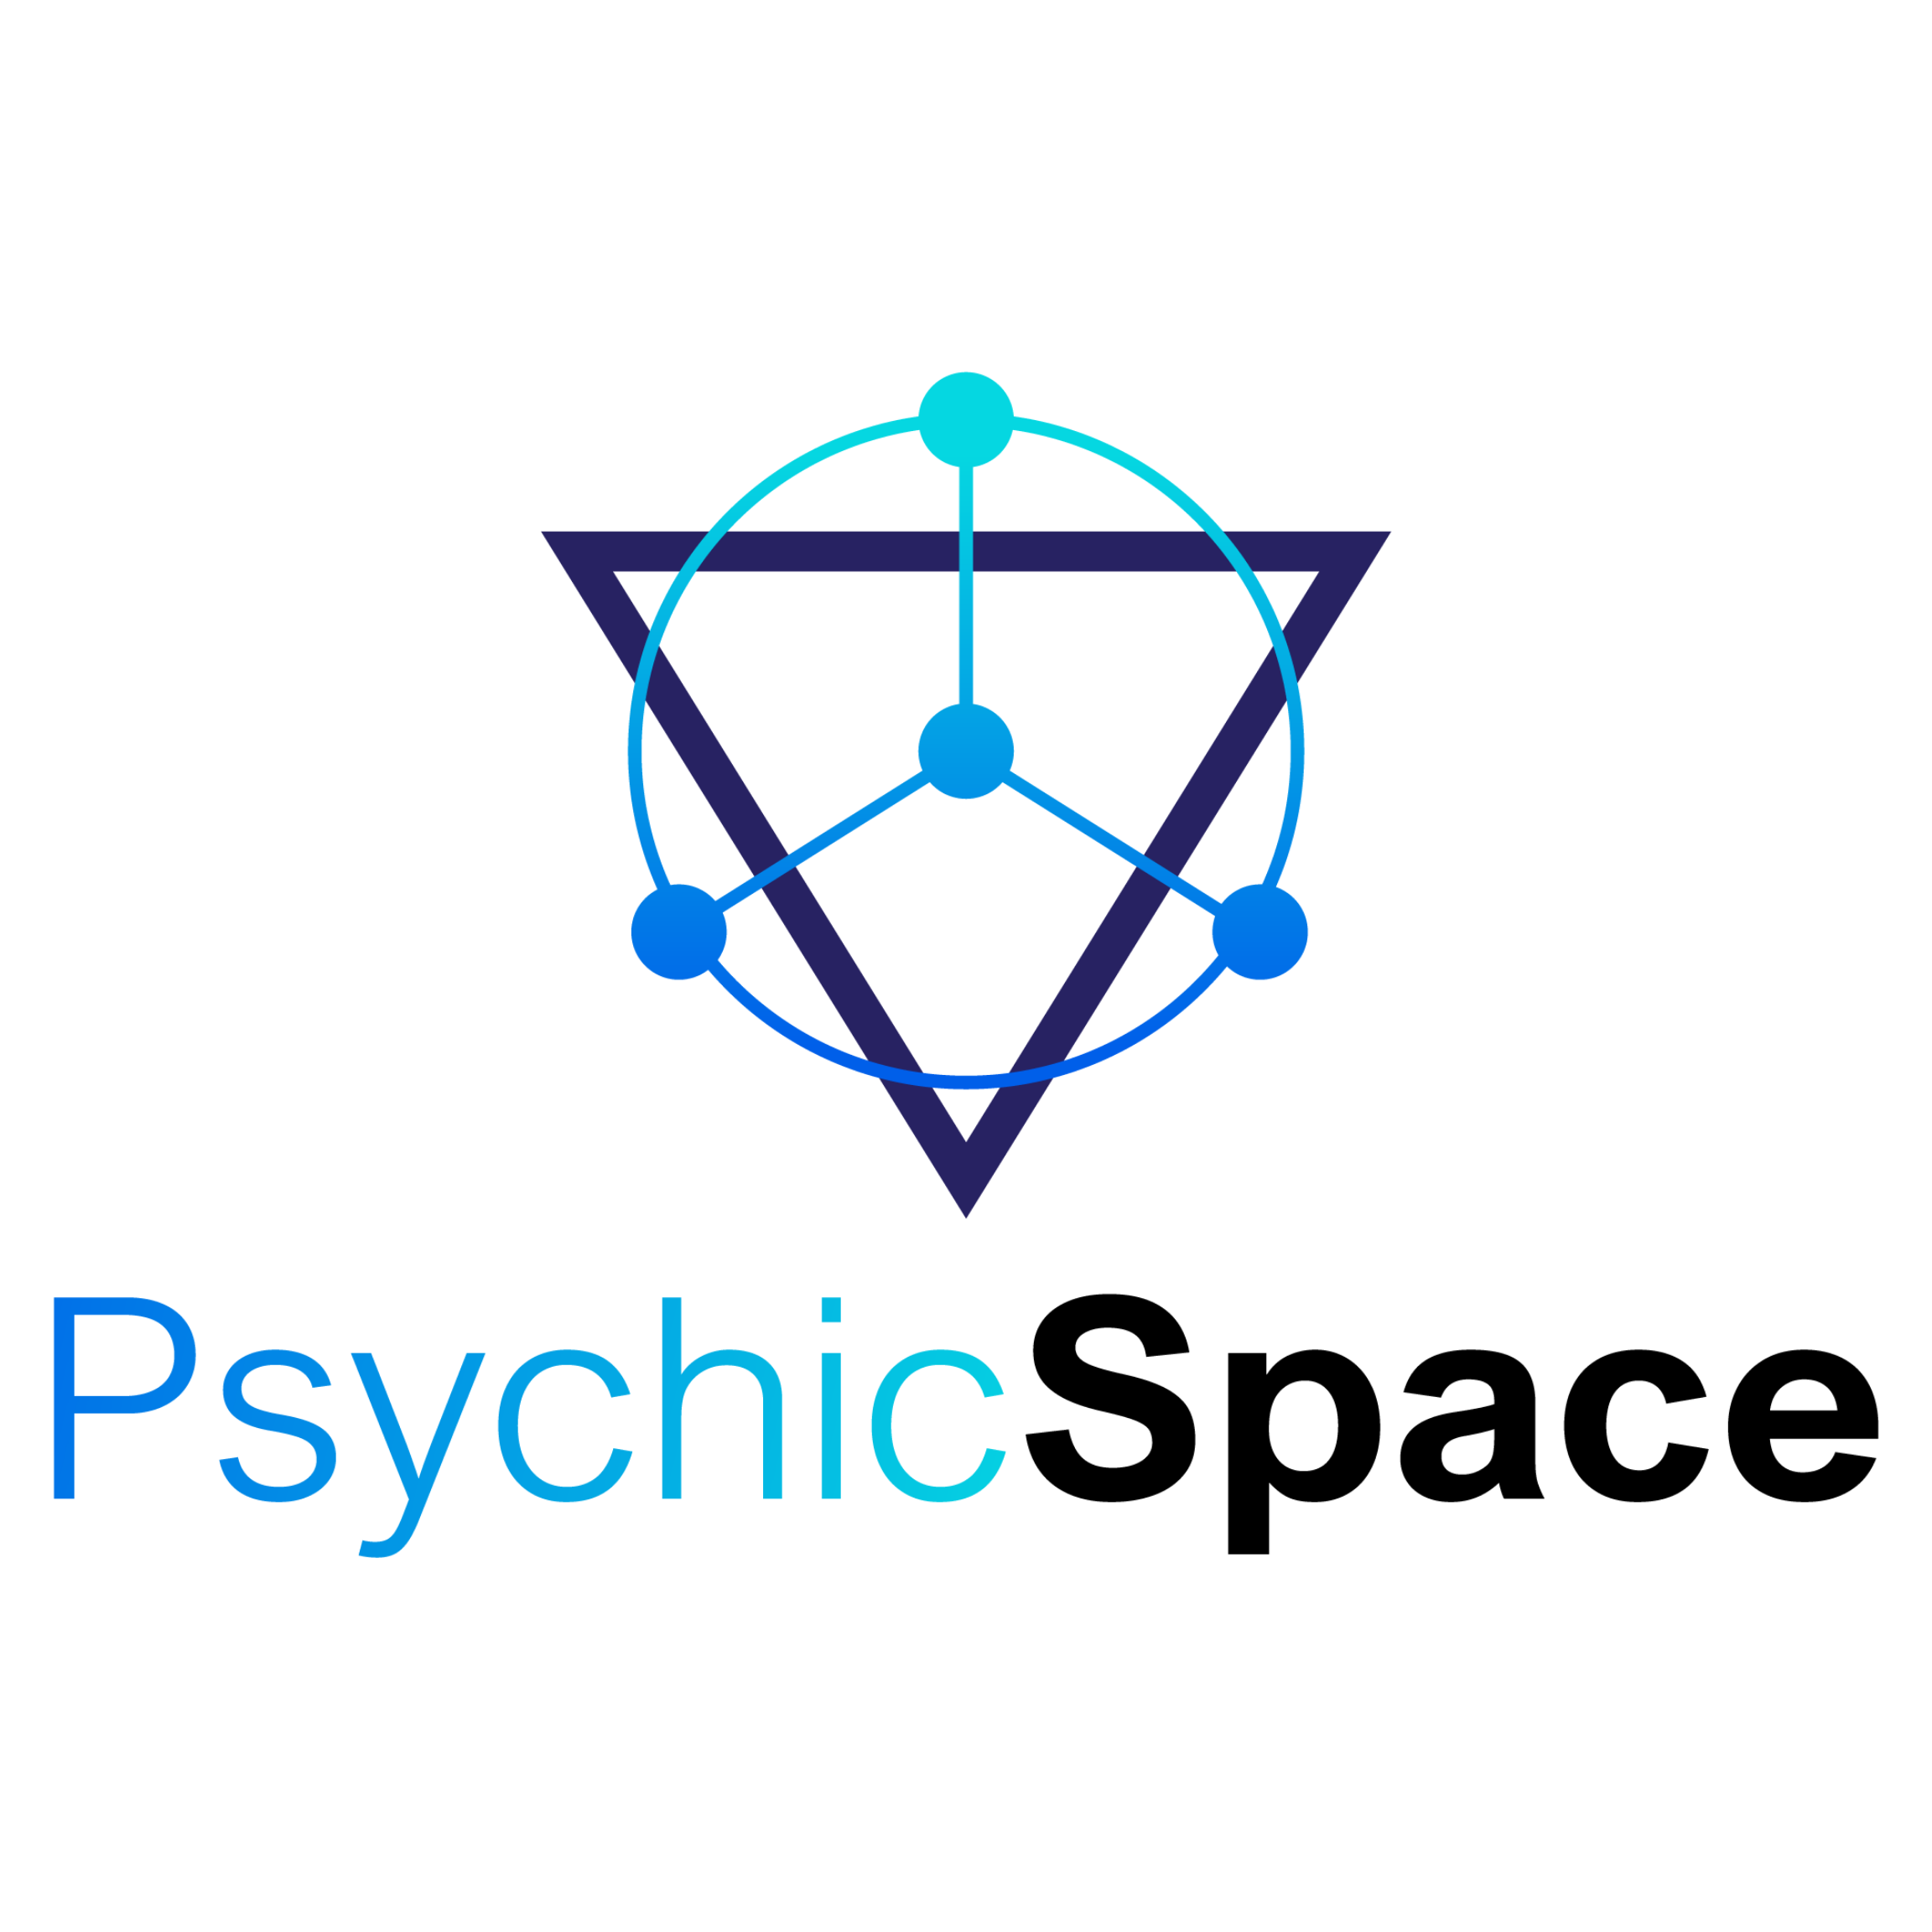 Psychic Space